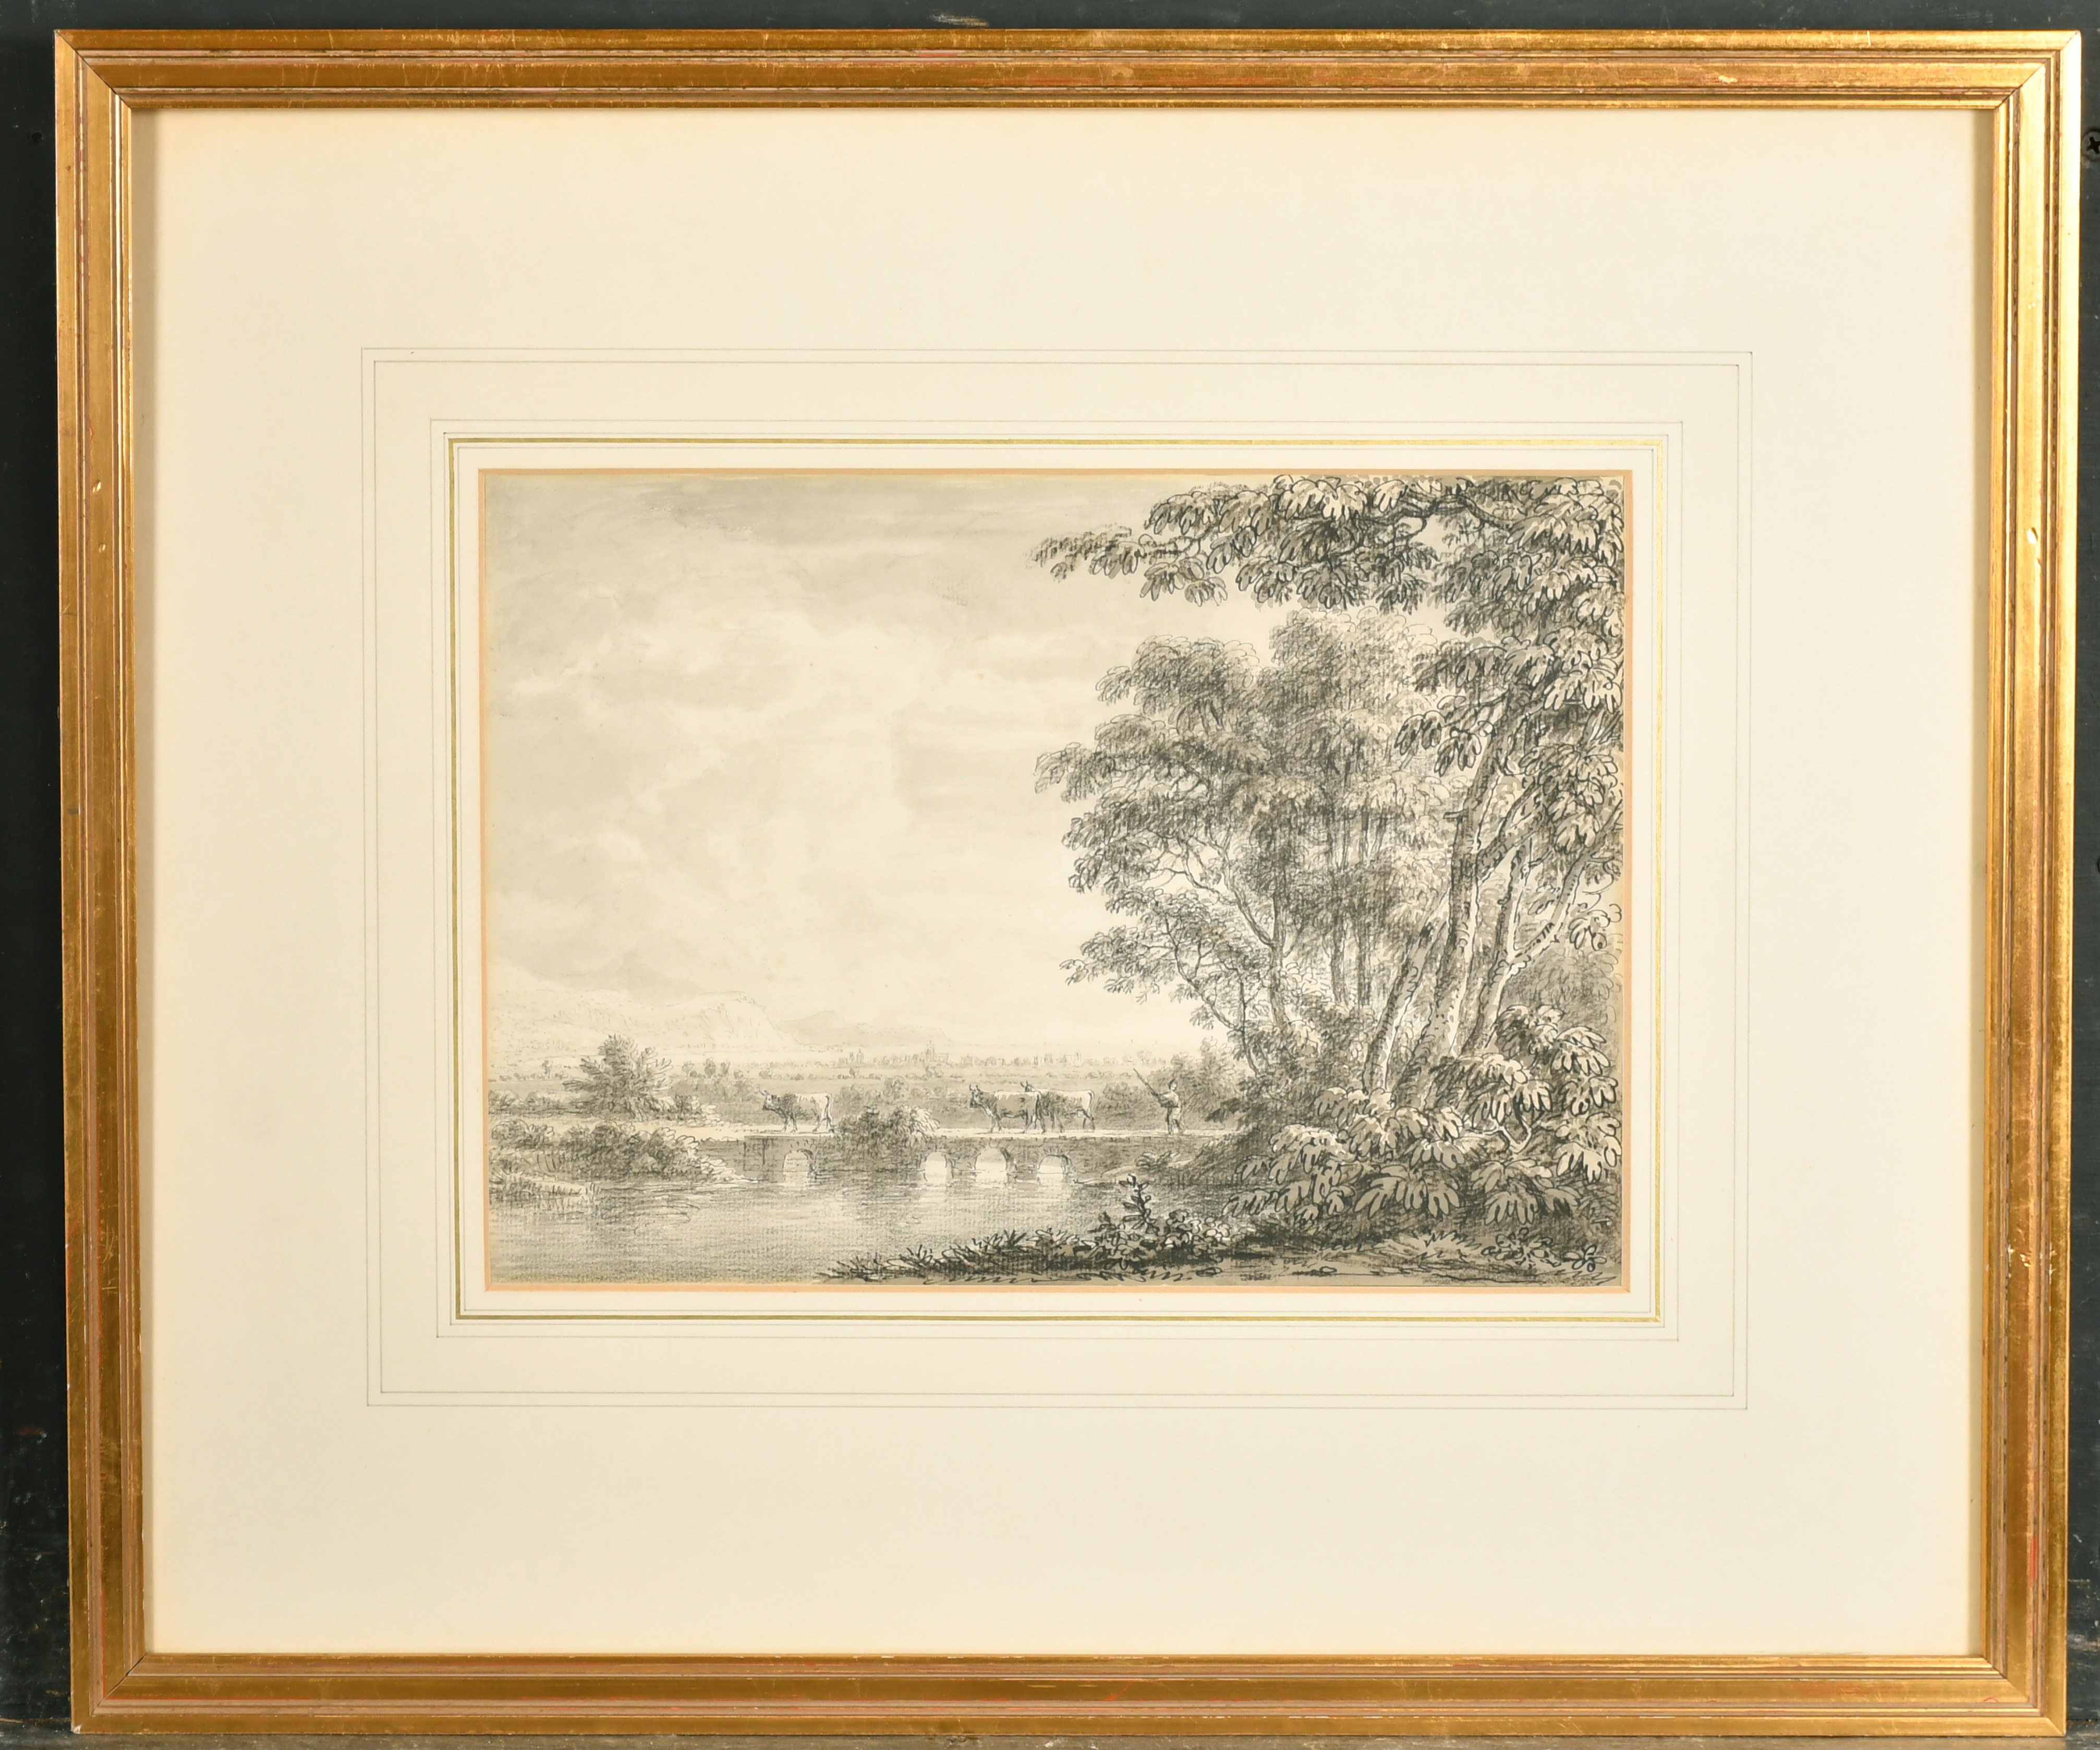 Anthony Thomas Devis (1729-1816) British. "Landscape View", Pencil and Wash, Signed with Initials, - Image 4 of 7